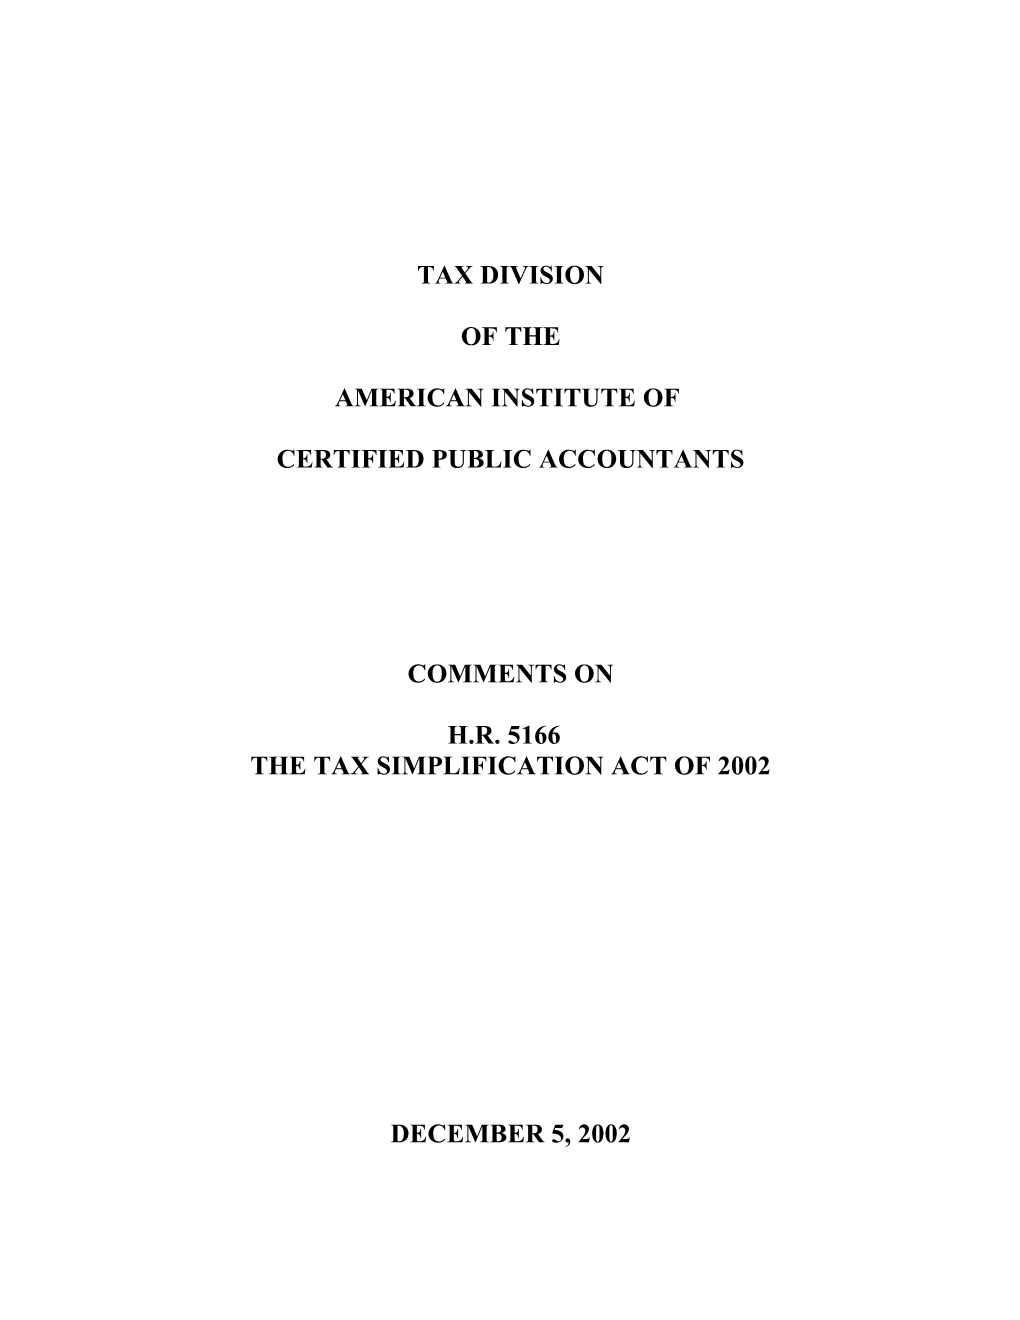 Comments on Tax Simplification Act of 2002